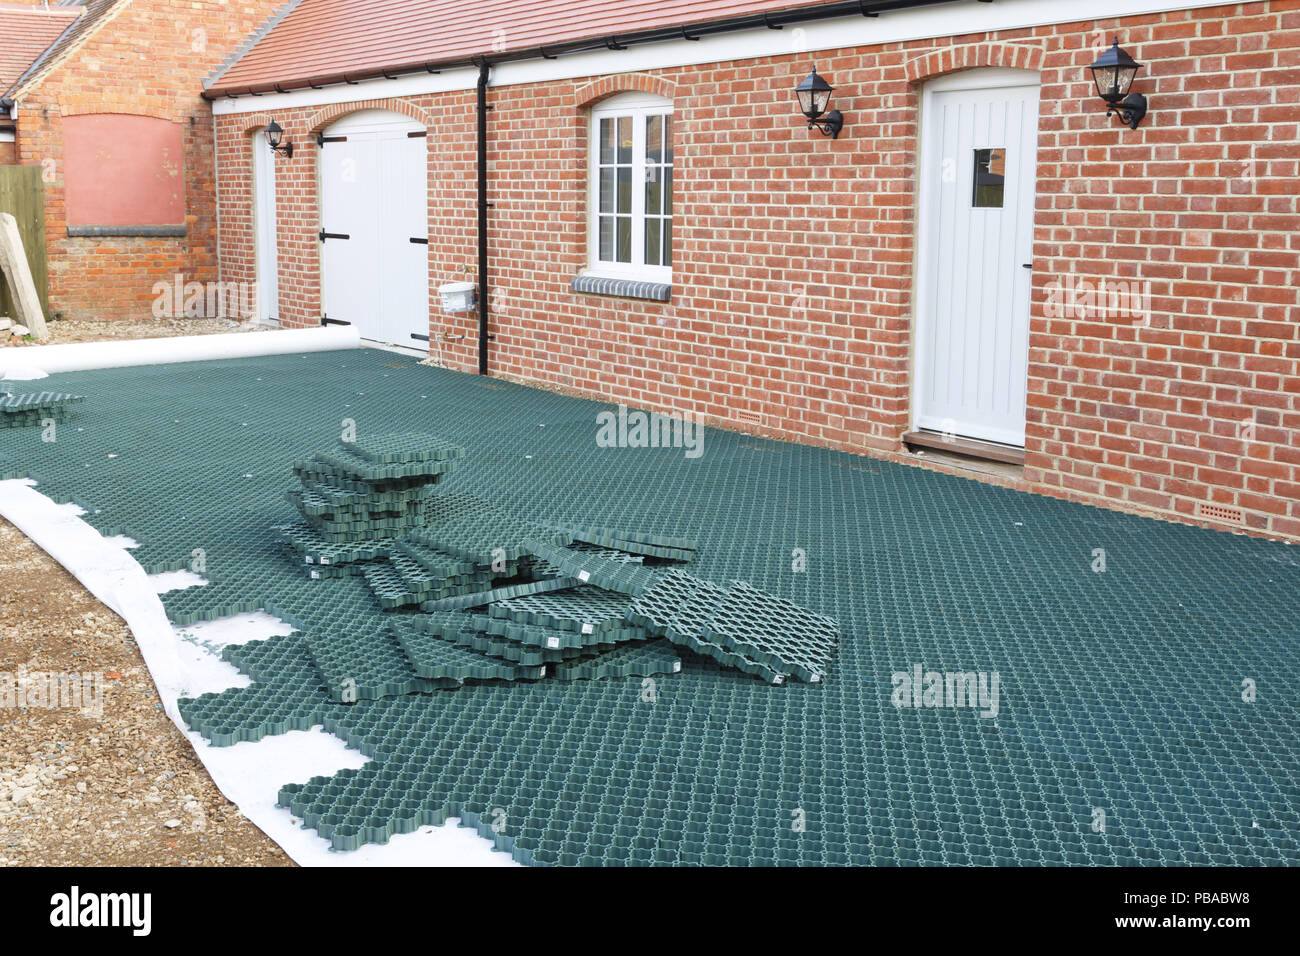 Ground guard grid system installed into a domestic parking area prior to covering with gravel Stock Photo